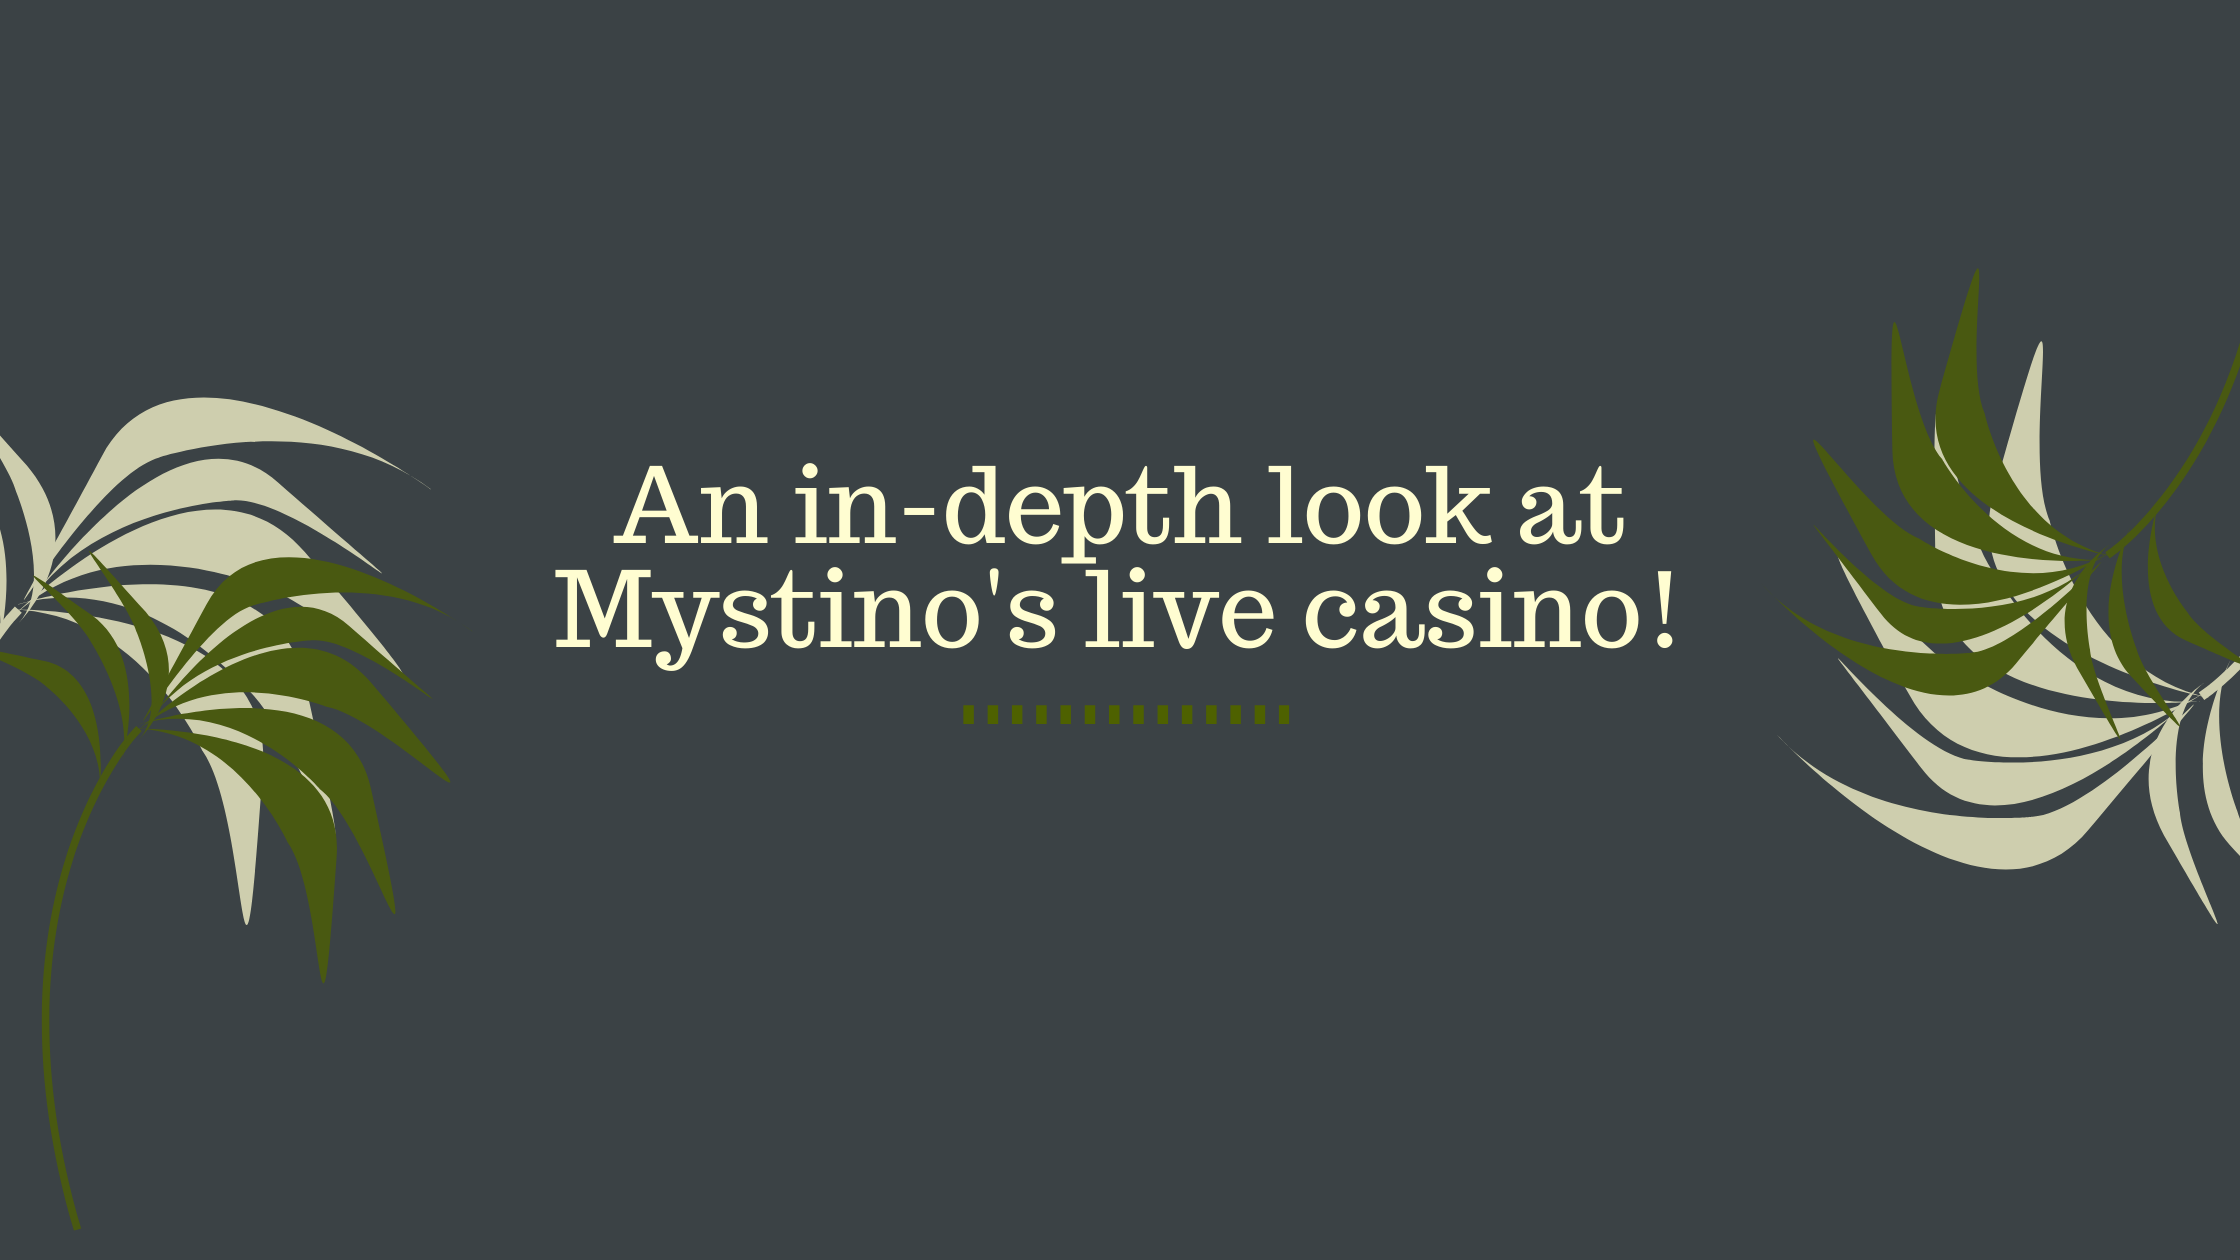 An in-depth look at Mystino's live casino!